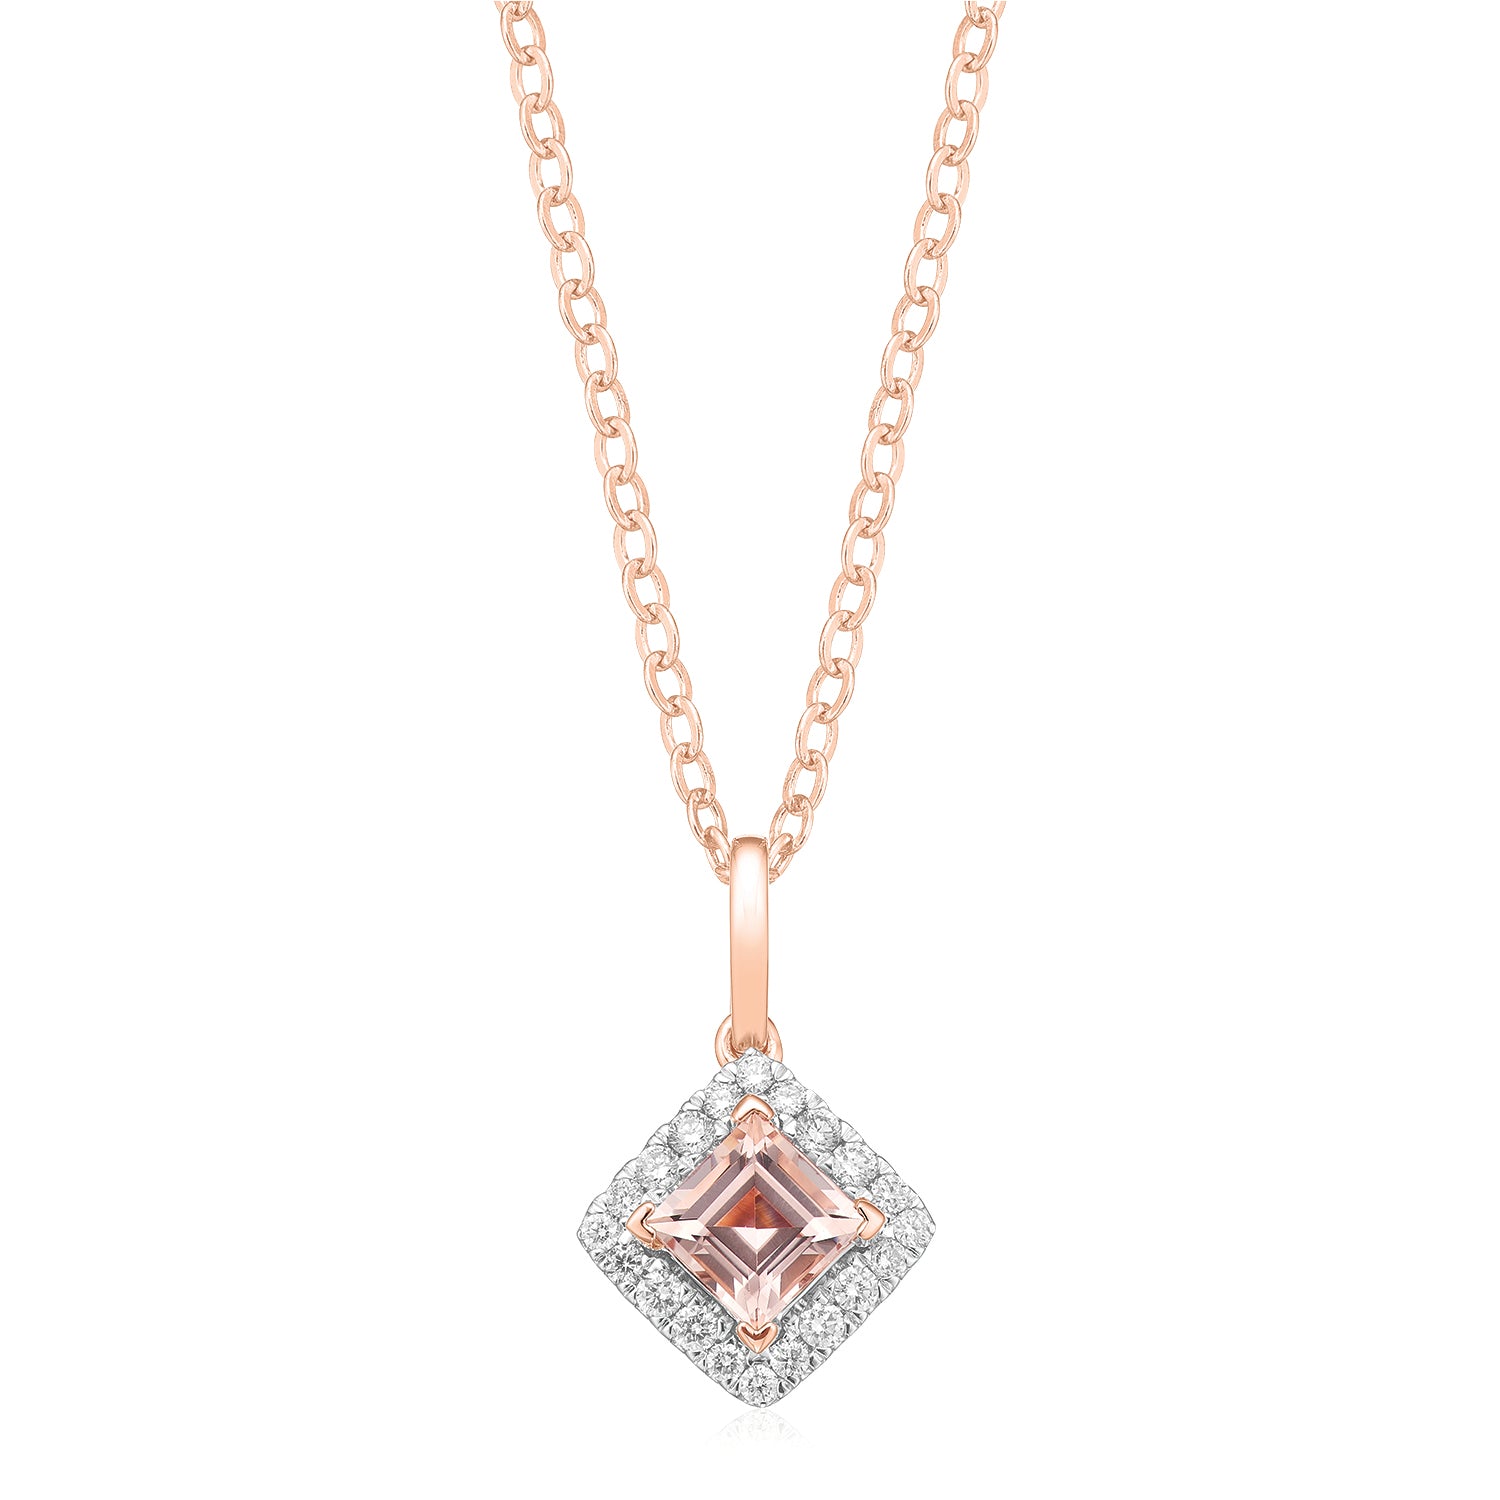 Buy Natural Morganite 14.64 Carats Set in 14K Rose Gold Pendant With 0.79  Carats Diamonds Online in India - Etsy